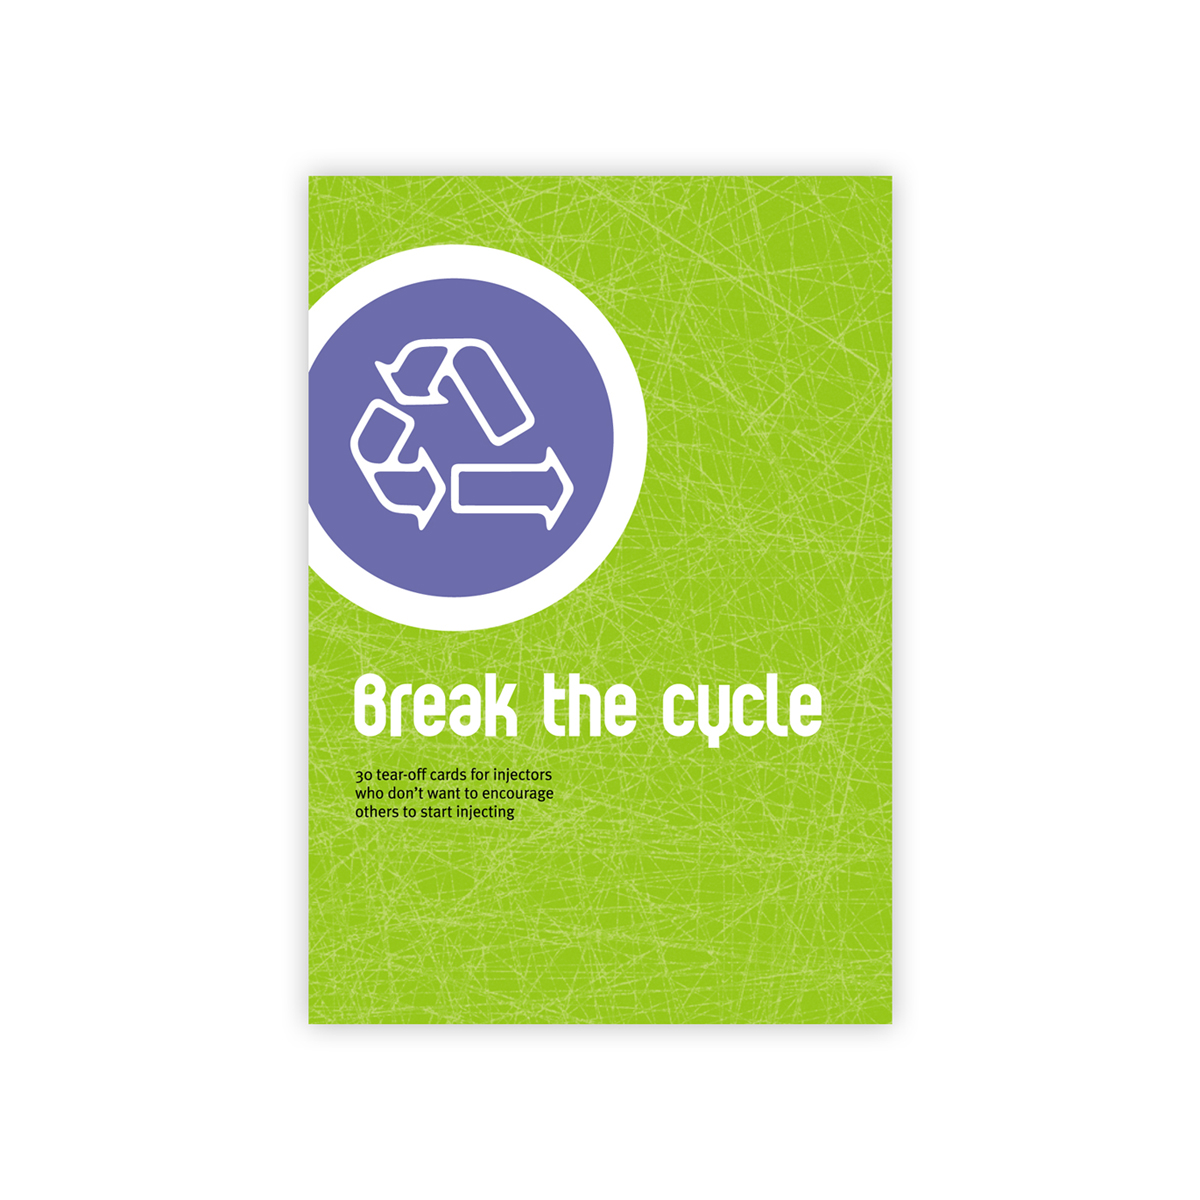 Break the cycle campaign cards